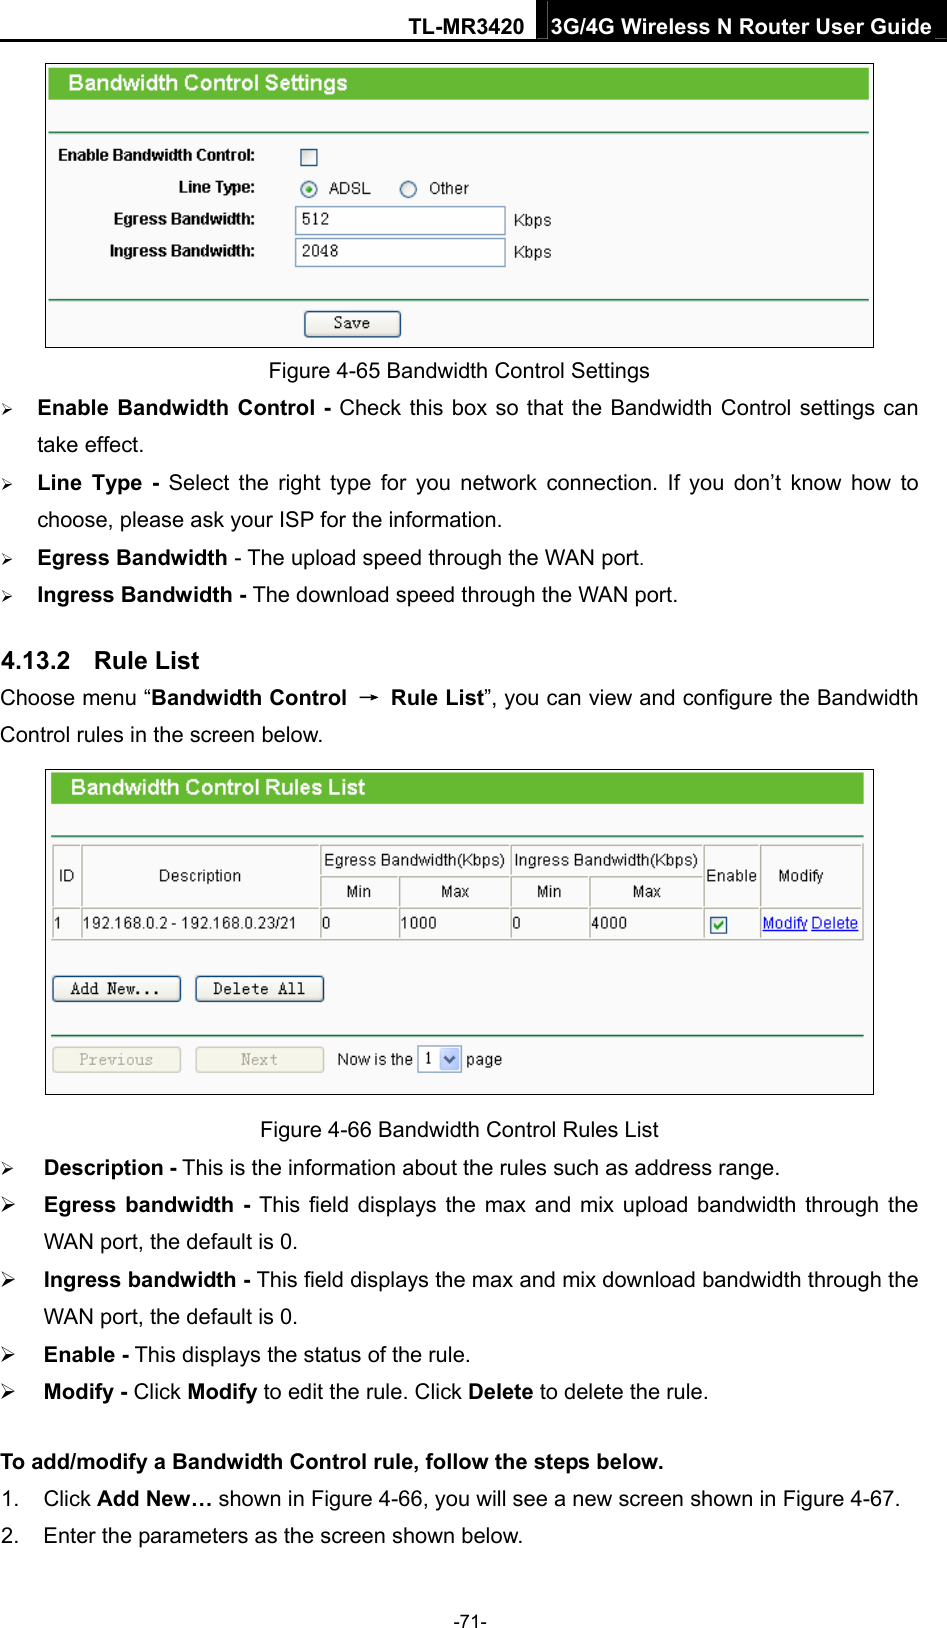 TL-MR3420 3G/4G Wireless N Router User Guide  Figure 4-65 Bandwidth Control Settings  Enable Bandwidth Control - Check this box so that the Bandwidth Control settings can take effect.  Line Type - Select the right type for you network connection. If you don’t know how to choose, please ask your ISP for the information.  Egress Bandwidth - The upload speed through the WAN port.  Ingress Bandwidth - The download speed through the WAN port. 4.13.2  Rule List Choose menu “Bandwidth Control  → Rule List”, you can view and configure the Bandwidth Control rules in the screen below.  Figure 4-66 Bandwidth Control Rules List  Description - This is the information about the rules such as address range.  Egress bandwidth - This field displays the max and mix upload bandwidth through the WAN port, the default is 0.  Ingress bandwidth - This field displays the max and mix download bandwidth through the WAN port, the default is 0.  Enable - This displays the status of the rule.  Modify - Click Modify to edit the rule. Click Delete to delete the rule. To add/modify a Bandwidth Control rule, follow the steps below. 1. Click Add New… shown in Figure 4-66, you will see a new screen shown in Figure 4-67. 2.  Enter the parameters as the screen shown below. -71- 